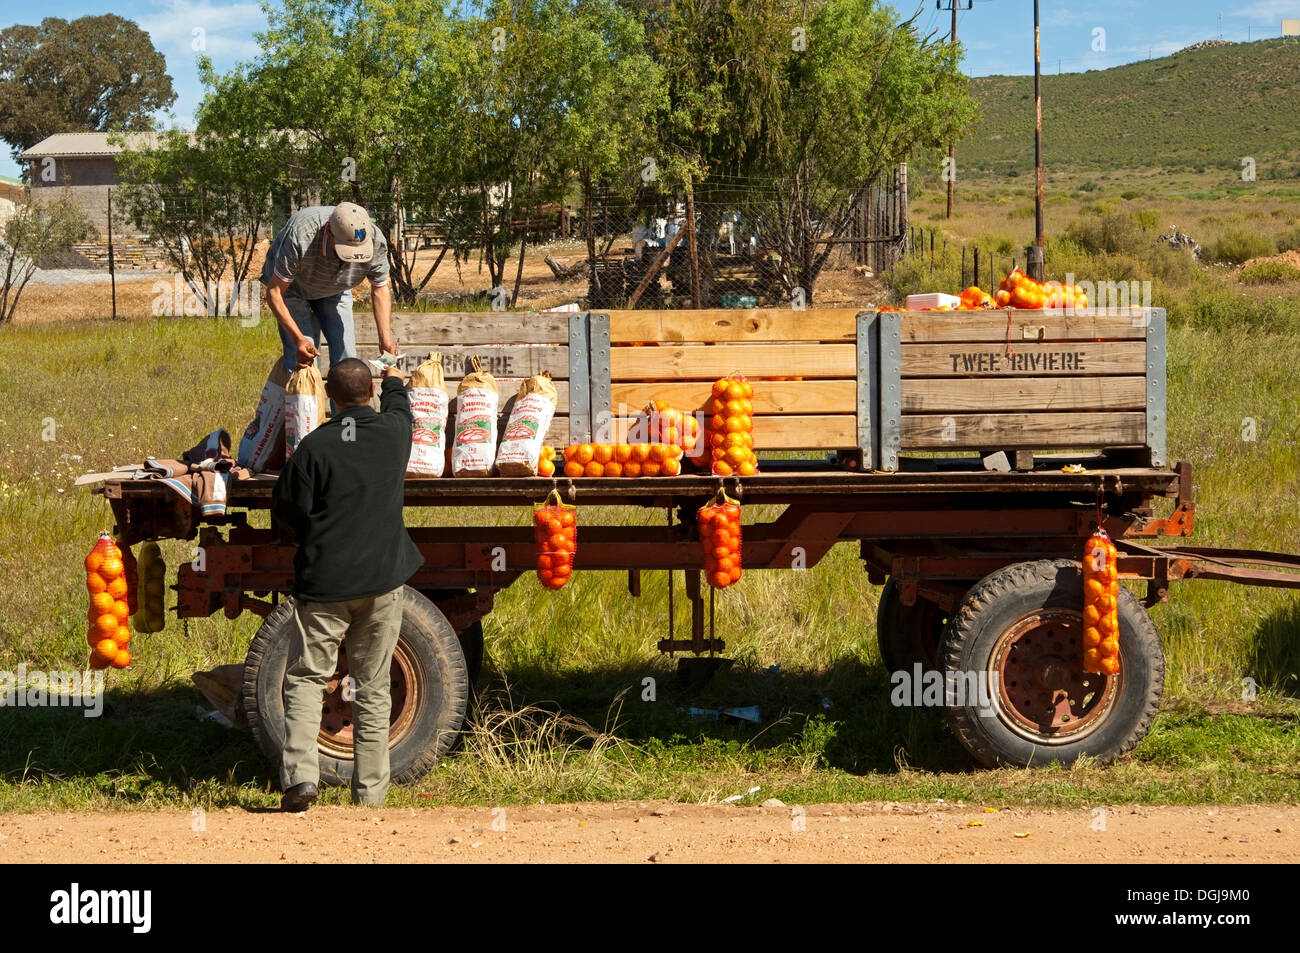 Man buying oranges at a roadside market stall, Citrusdal, Western Cape province, South Africa, Africa Stock Photo